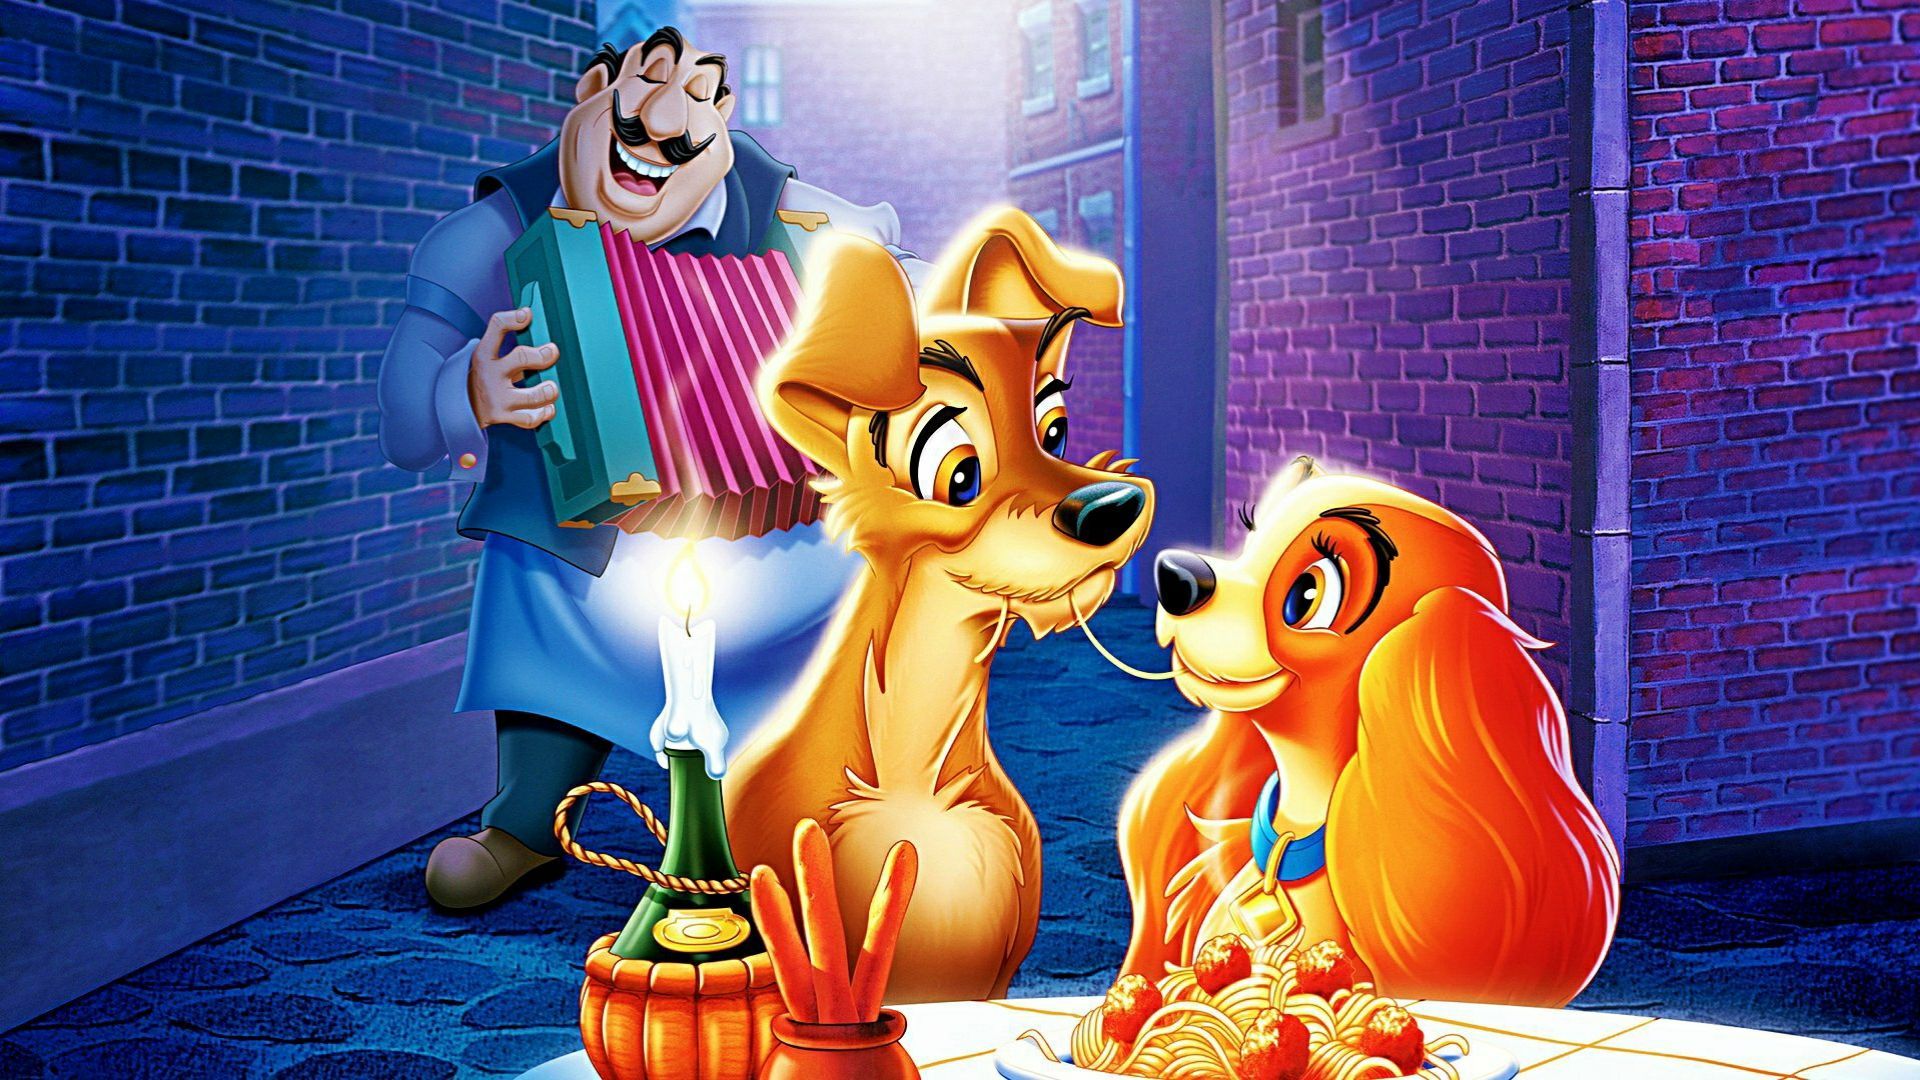 Lady and the Tramp background